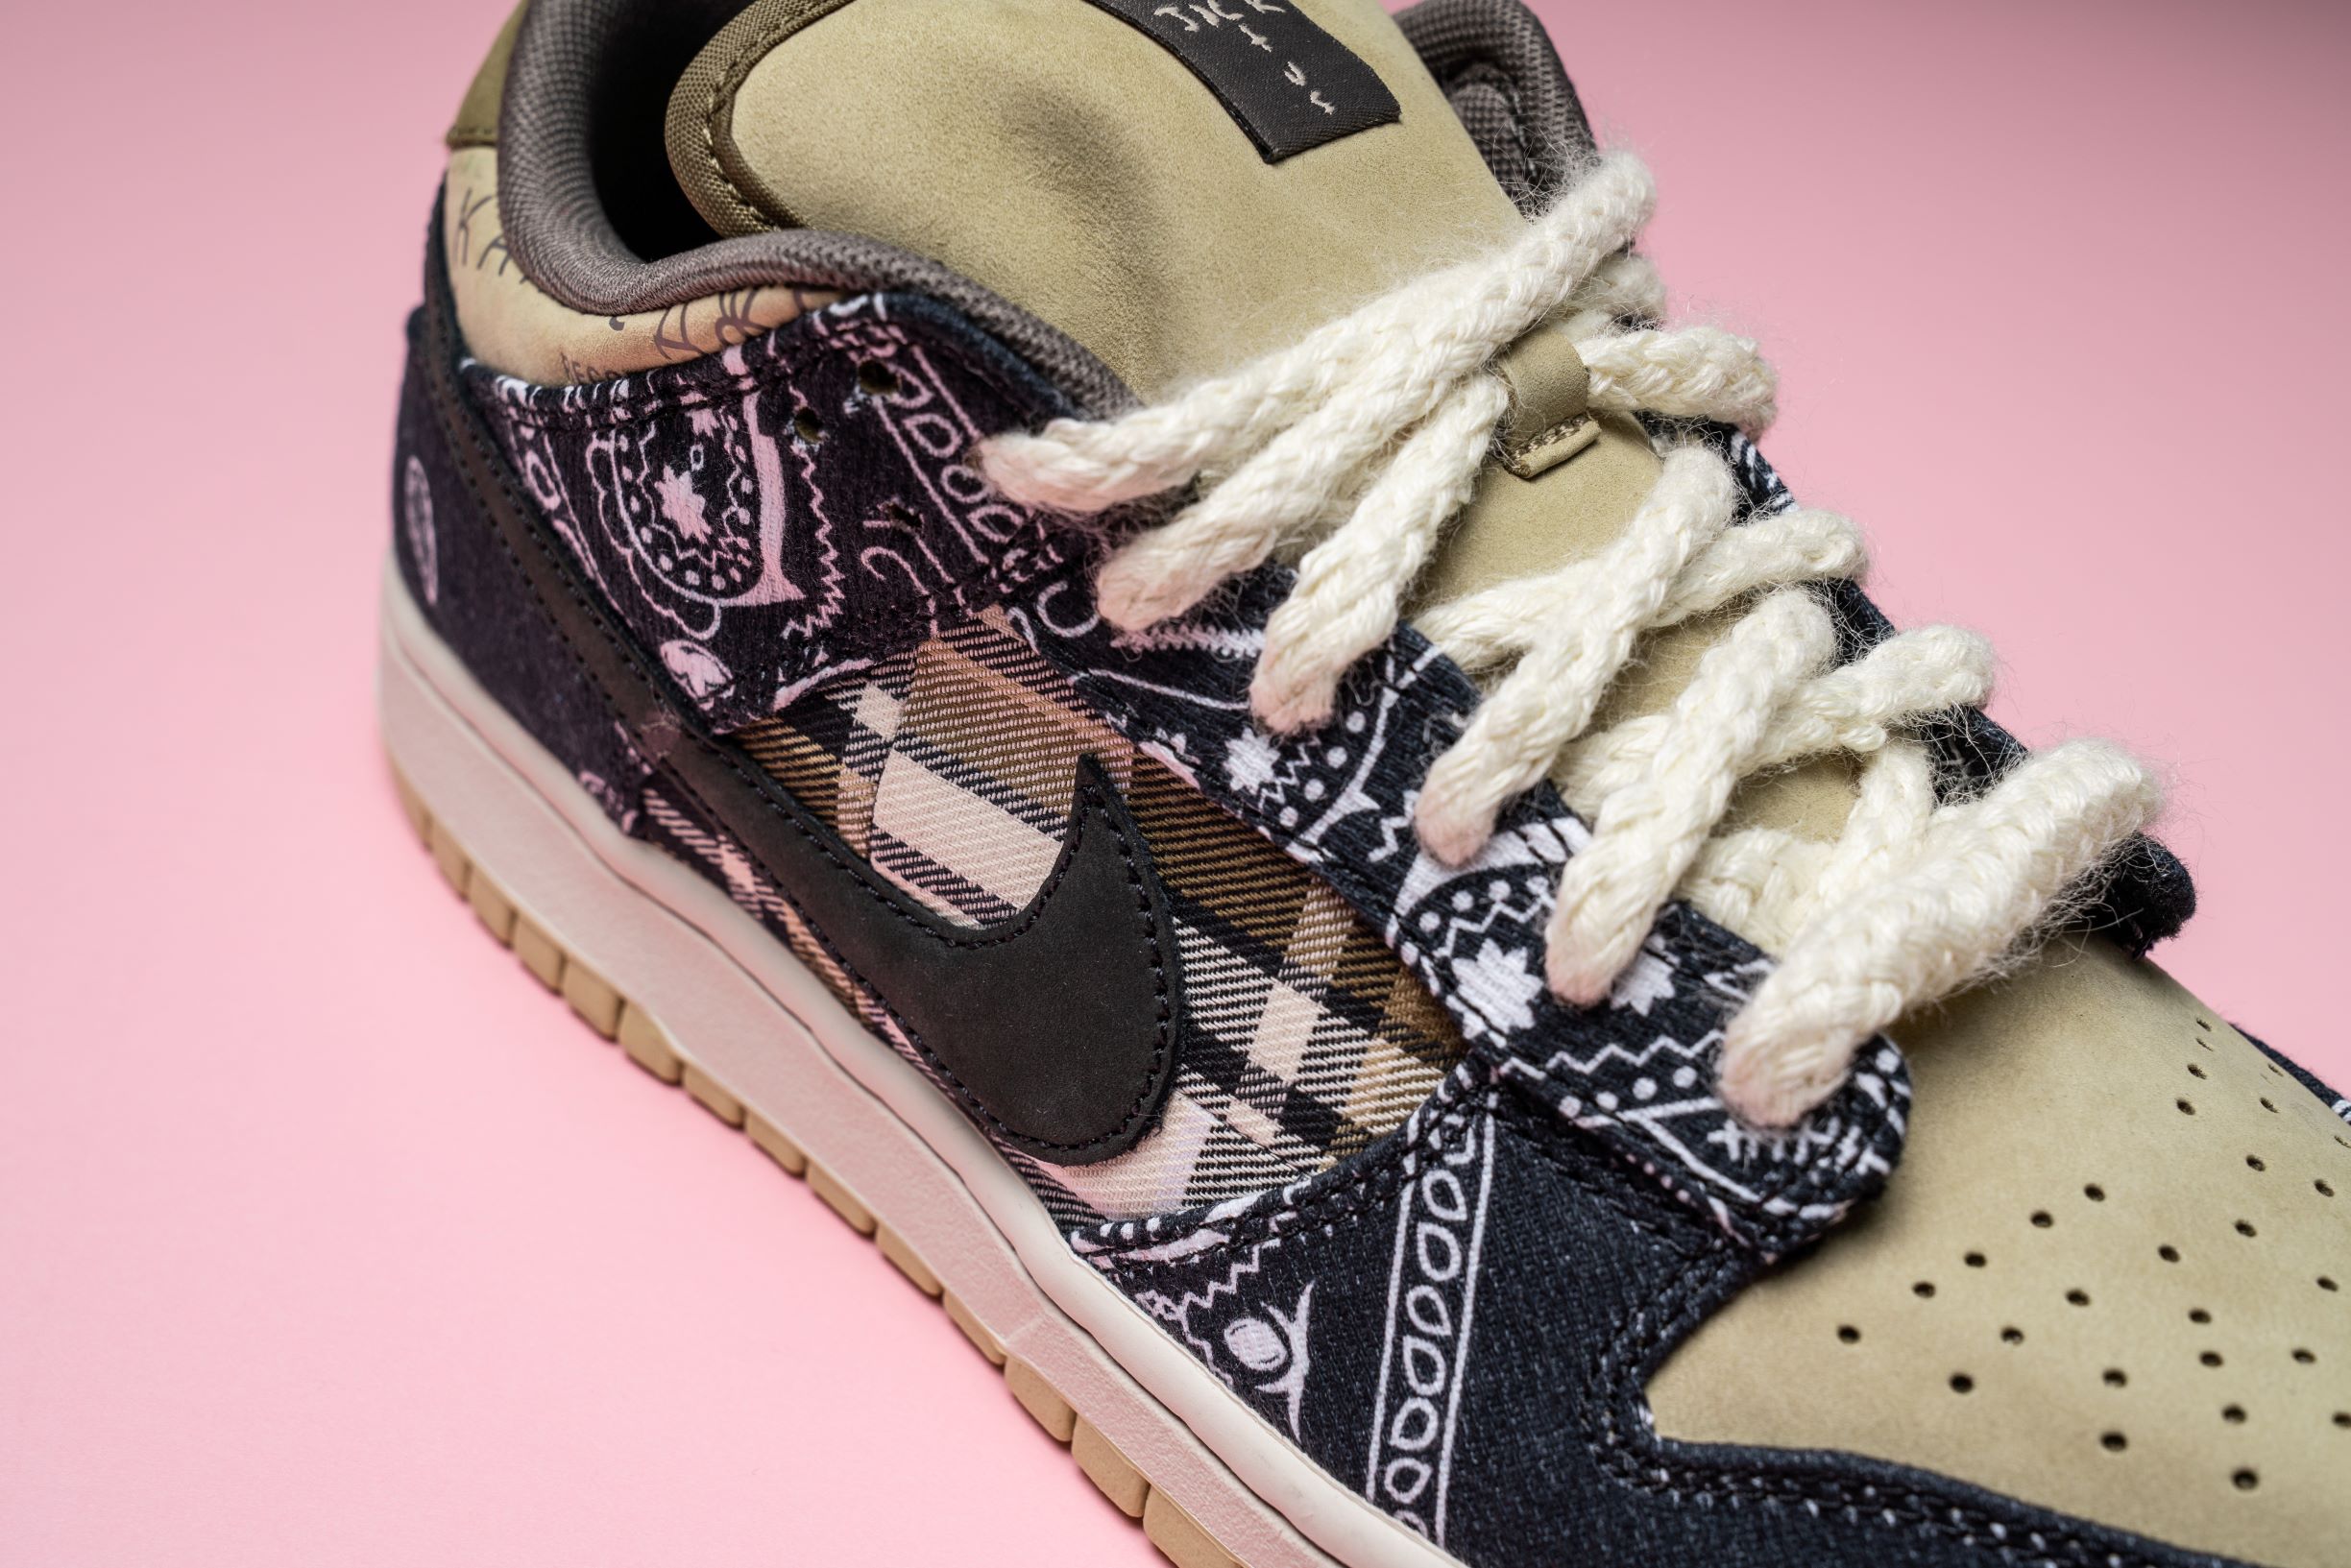 Nike Teams With Travis Scott For Bandanna-Print Dunk Low Sneakers - Maxim